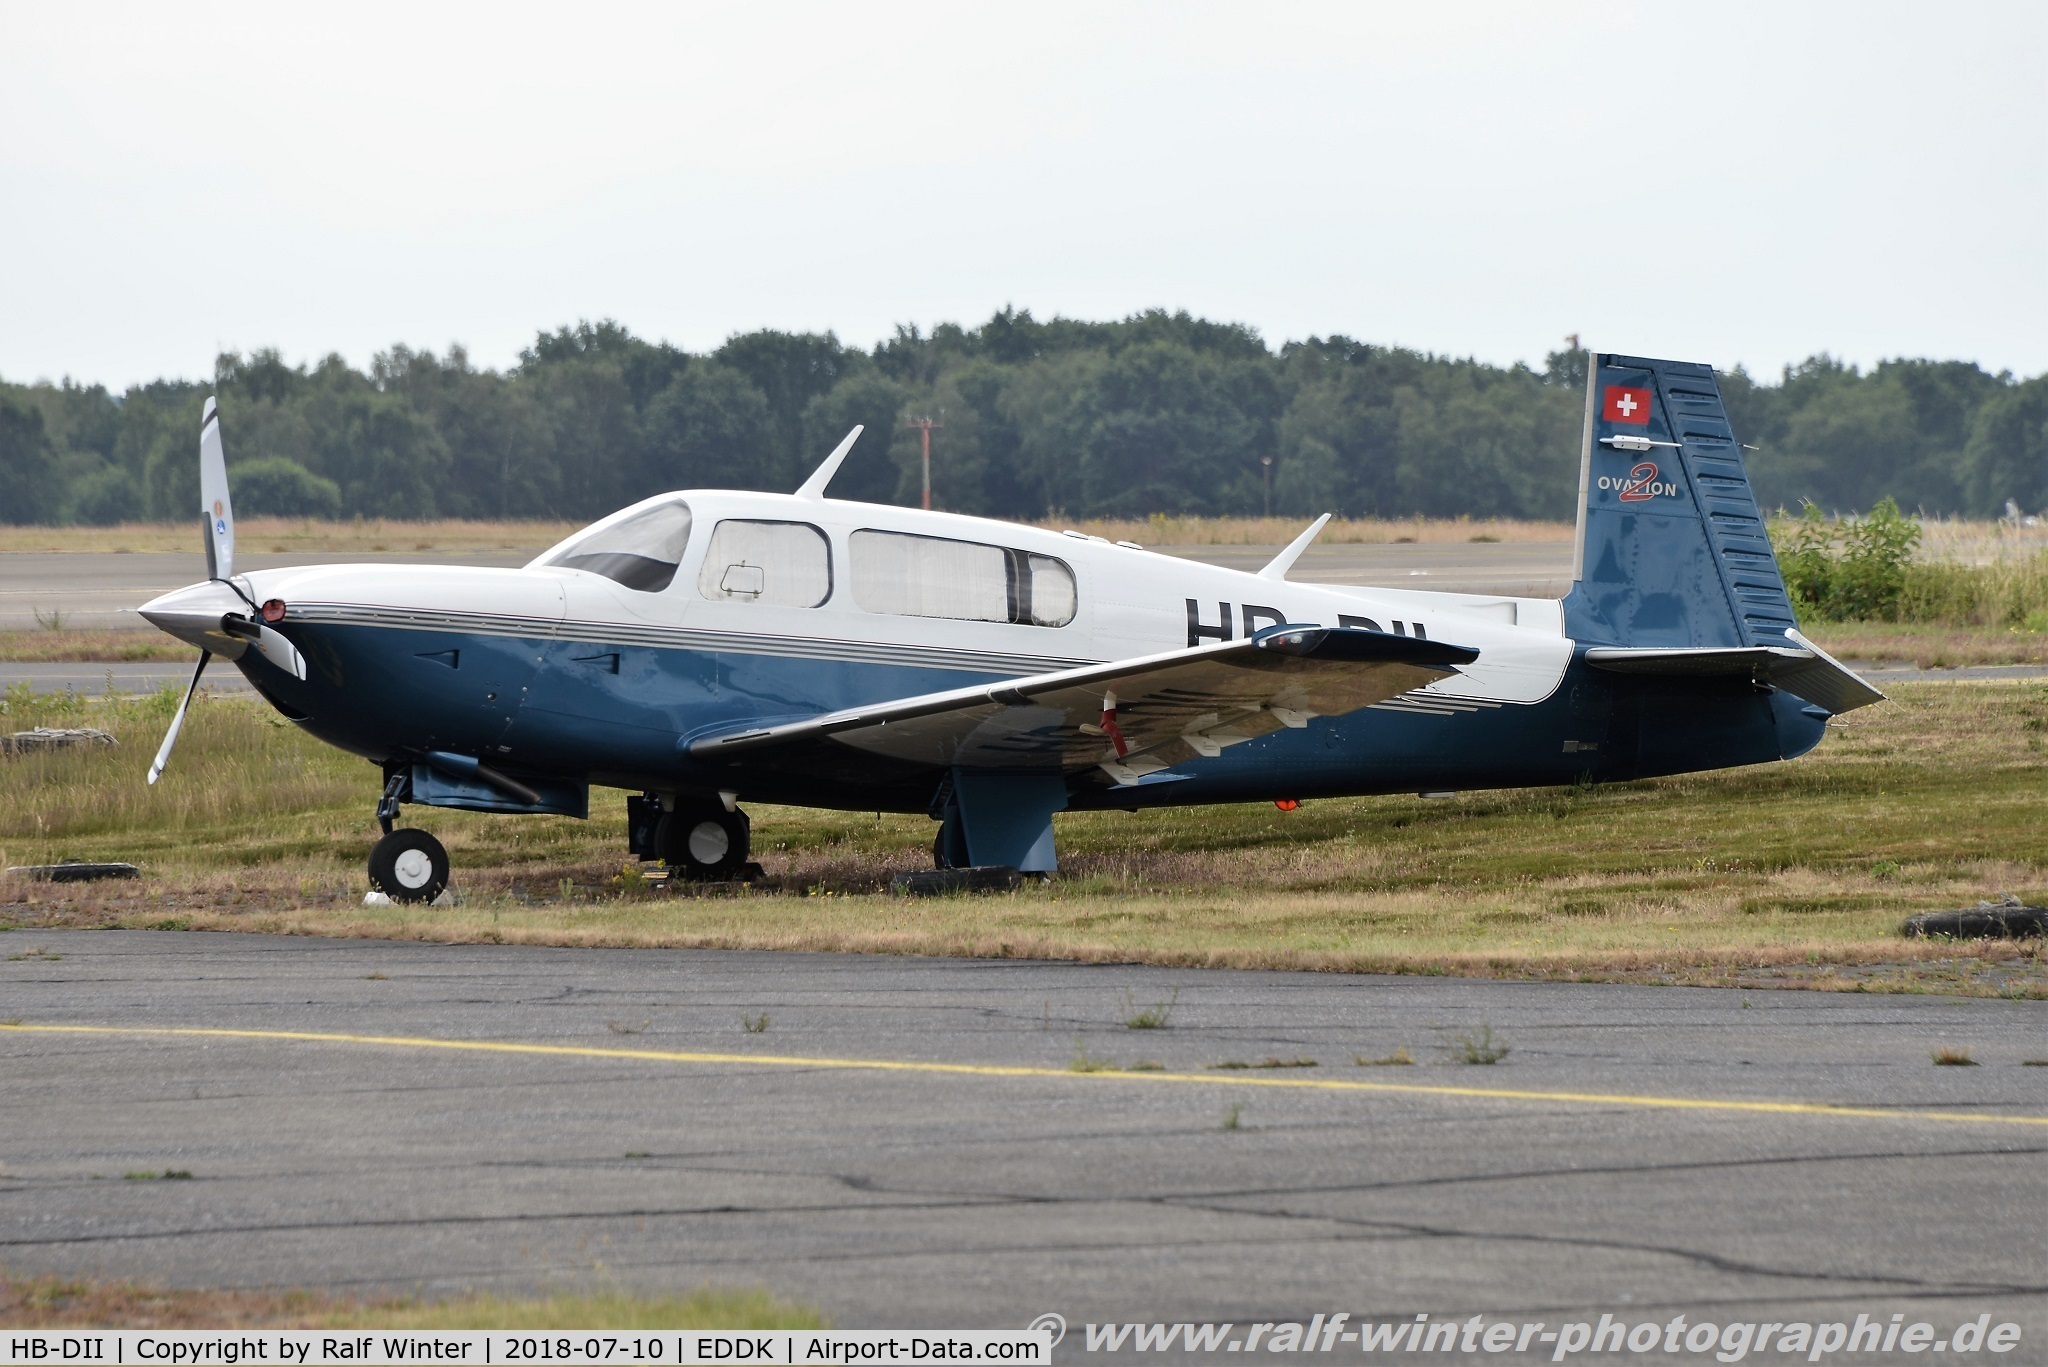 HB-DII, 2000 Mooney M20R Ovation C/N 29-0233, Mooney M-20R Ovation - Private - 29-0233 - HB-DII - 10.07.2018 - CGN